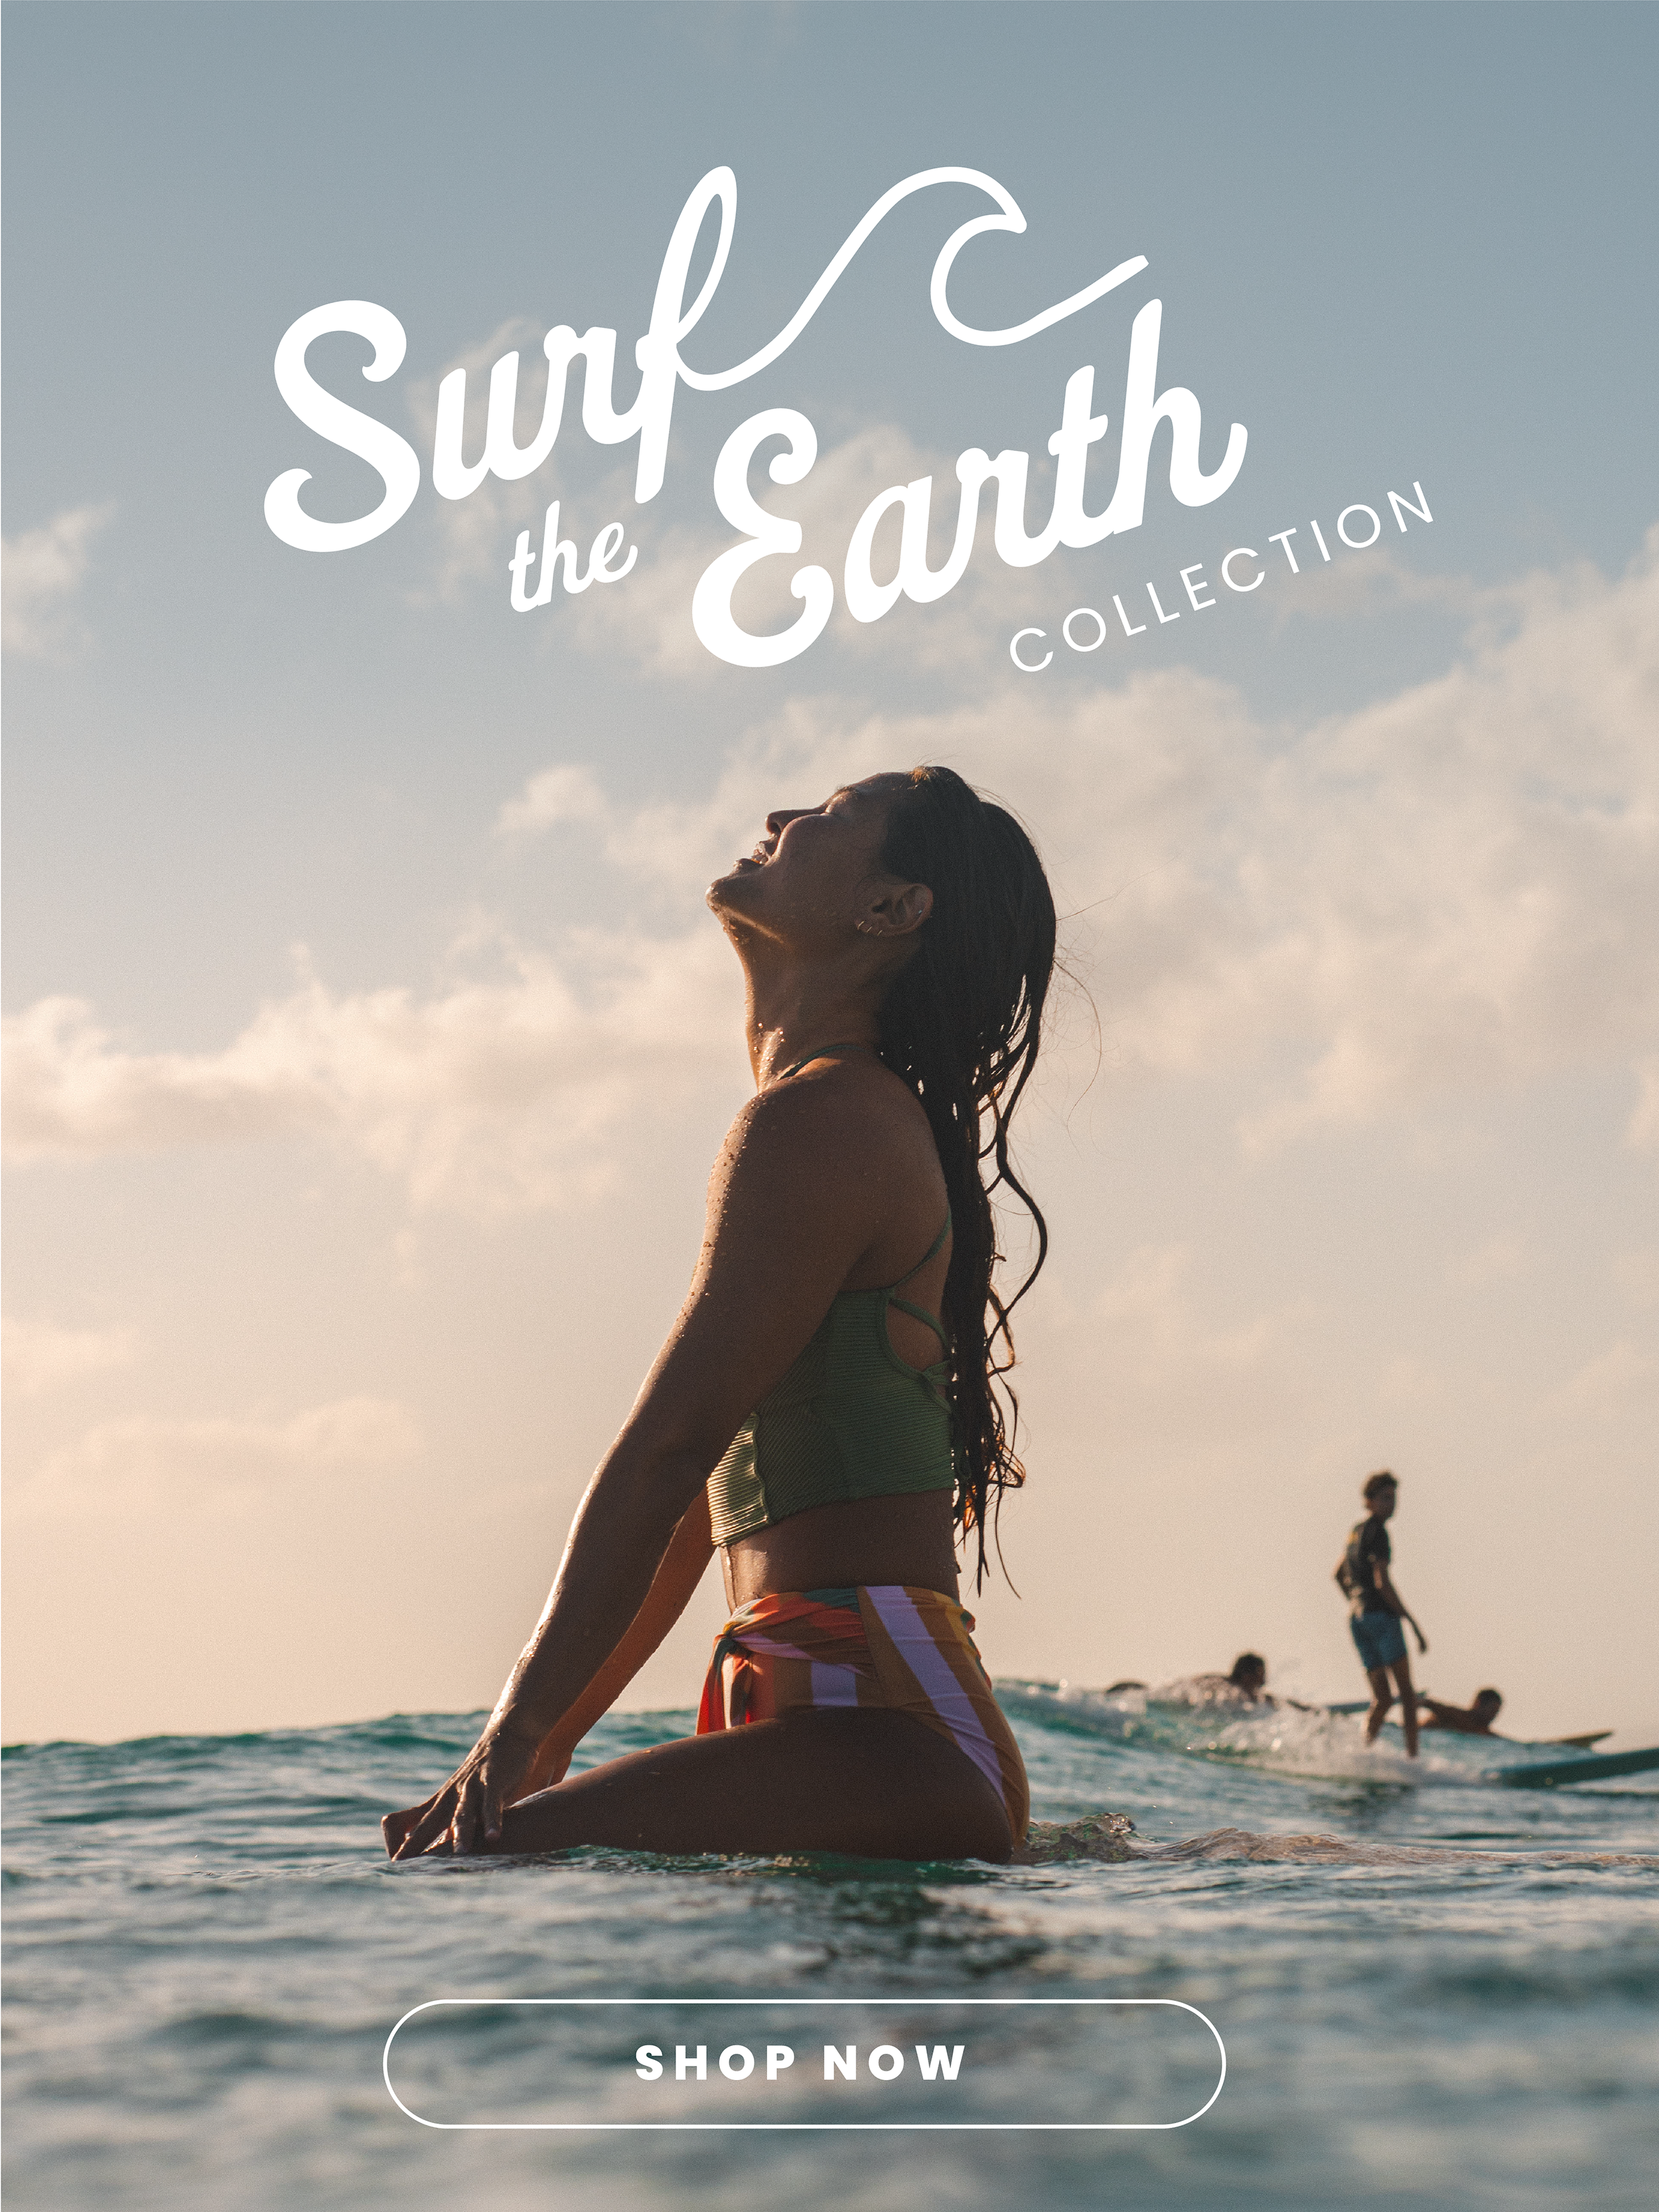 Surf the Earth Collection Image